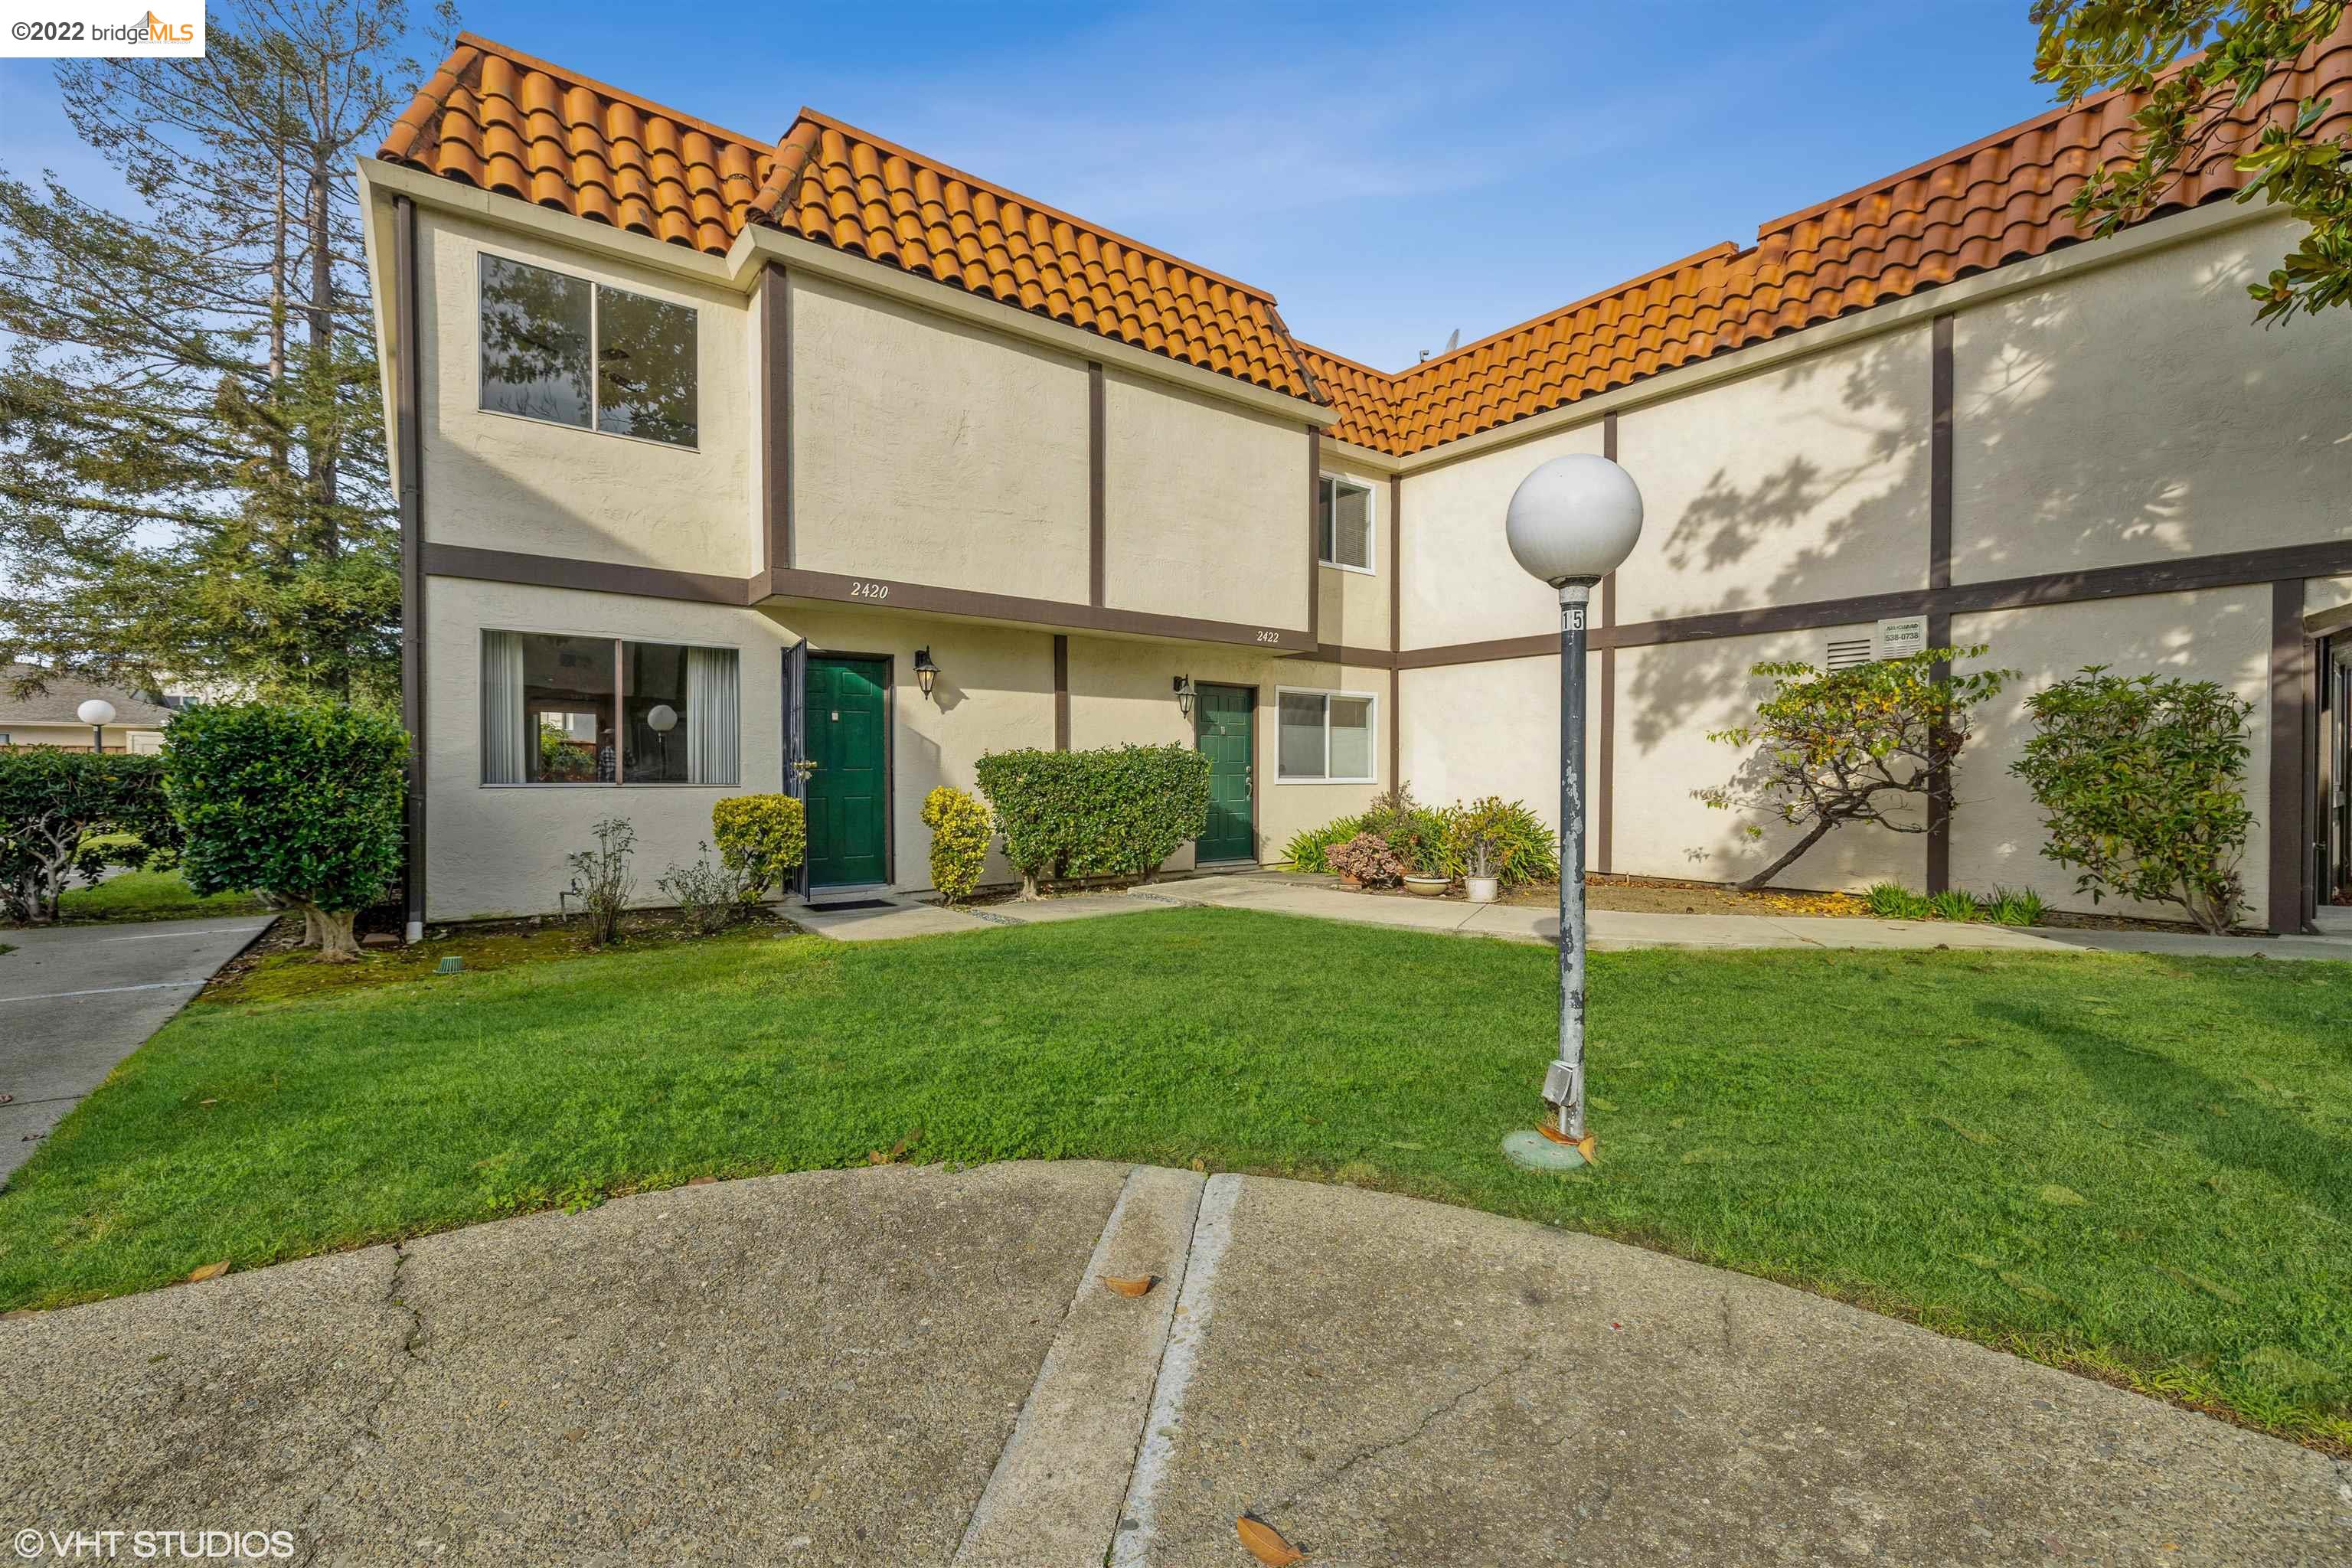 Photo of 2420 Belvedere Ave in San Leandro, CA